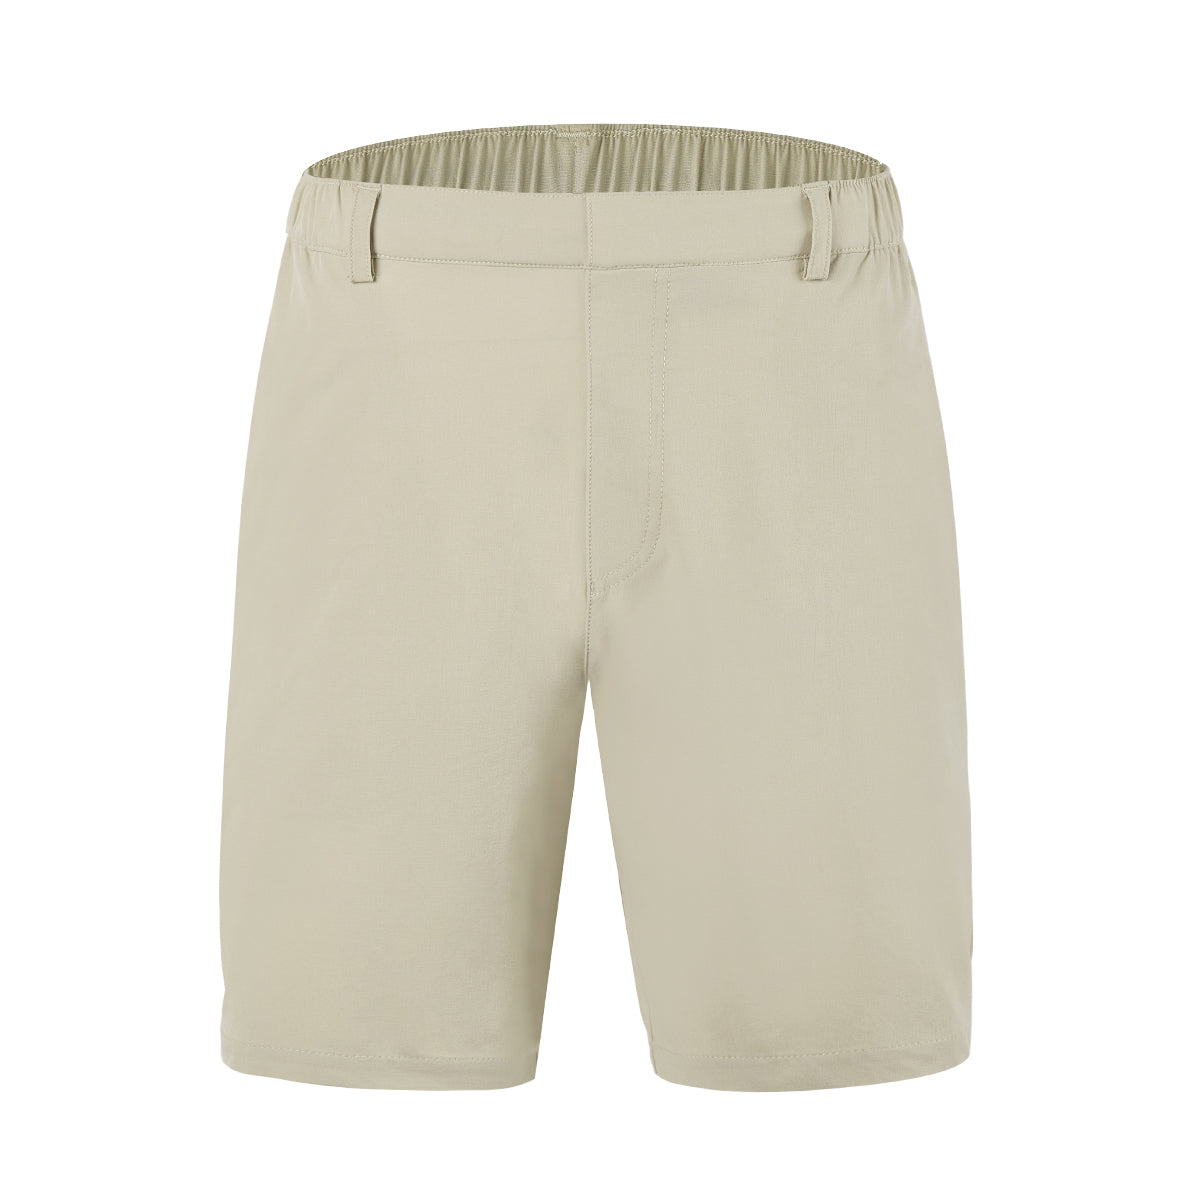 One for All Everyday Shorts Khaki